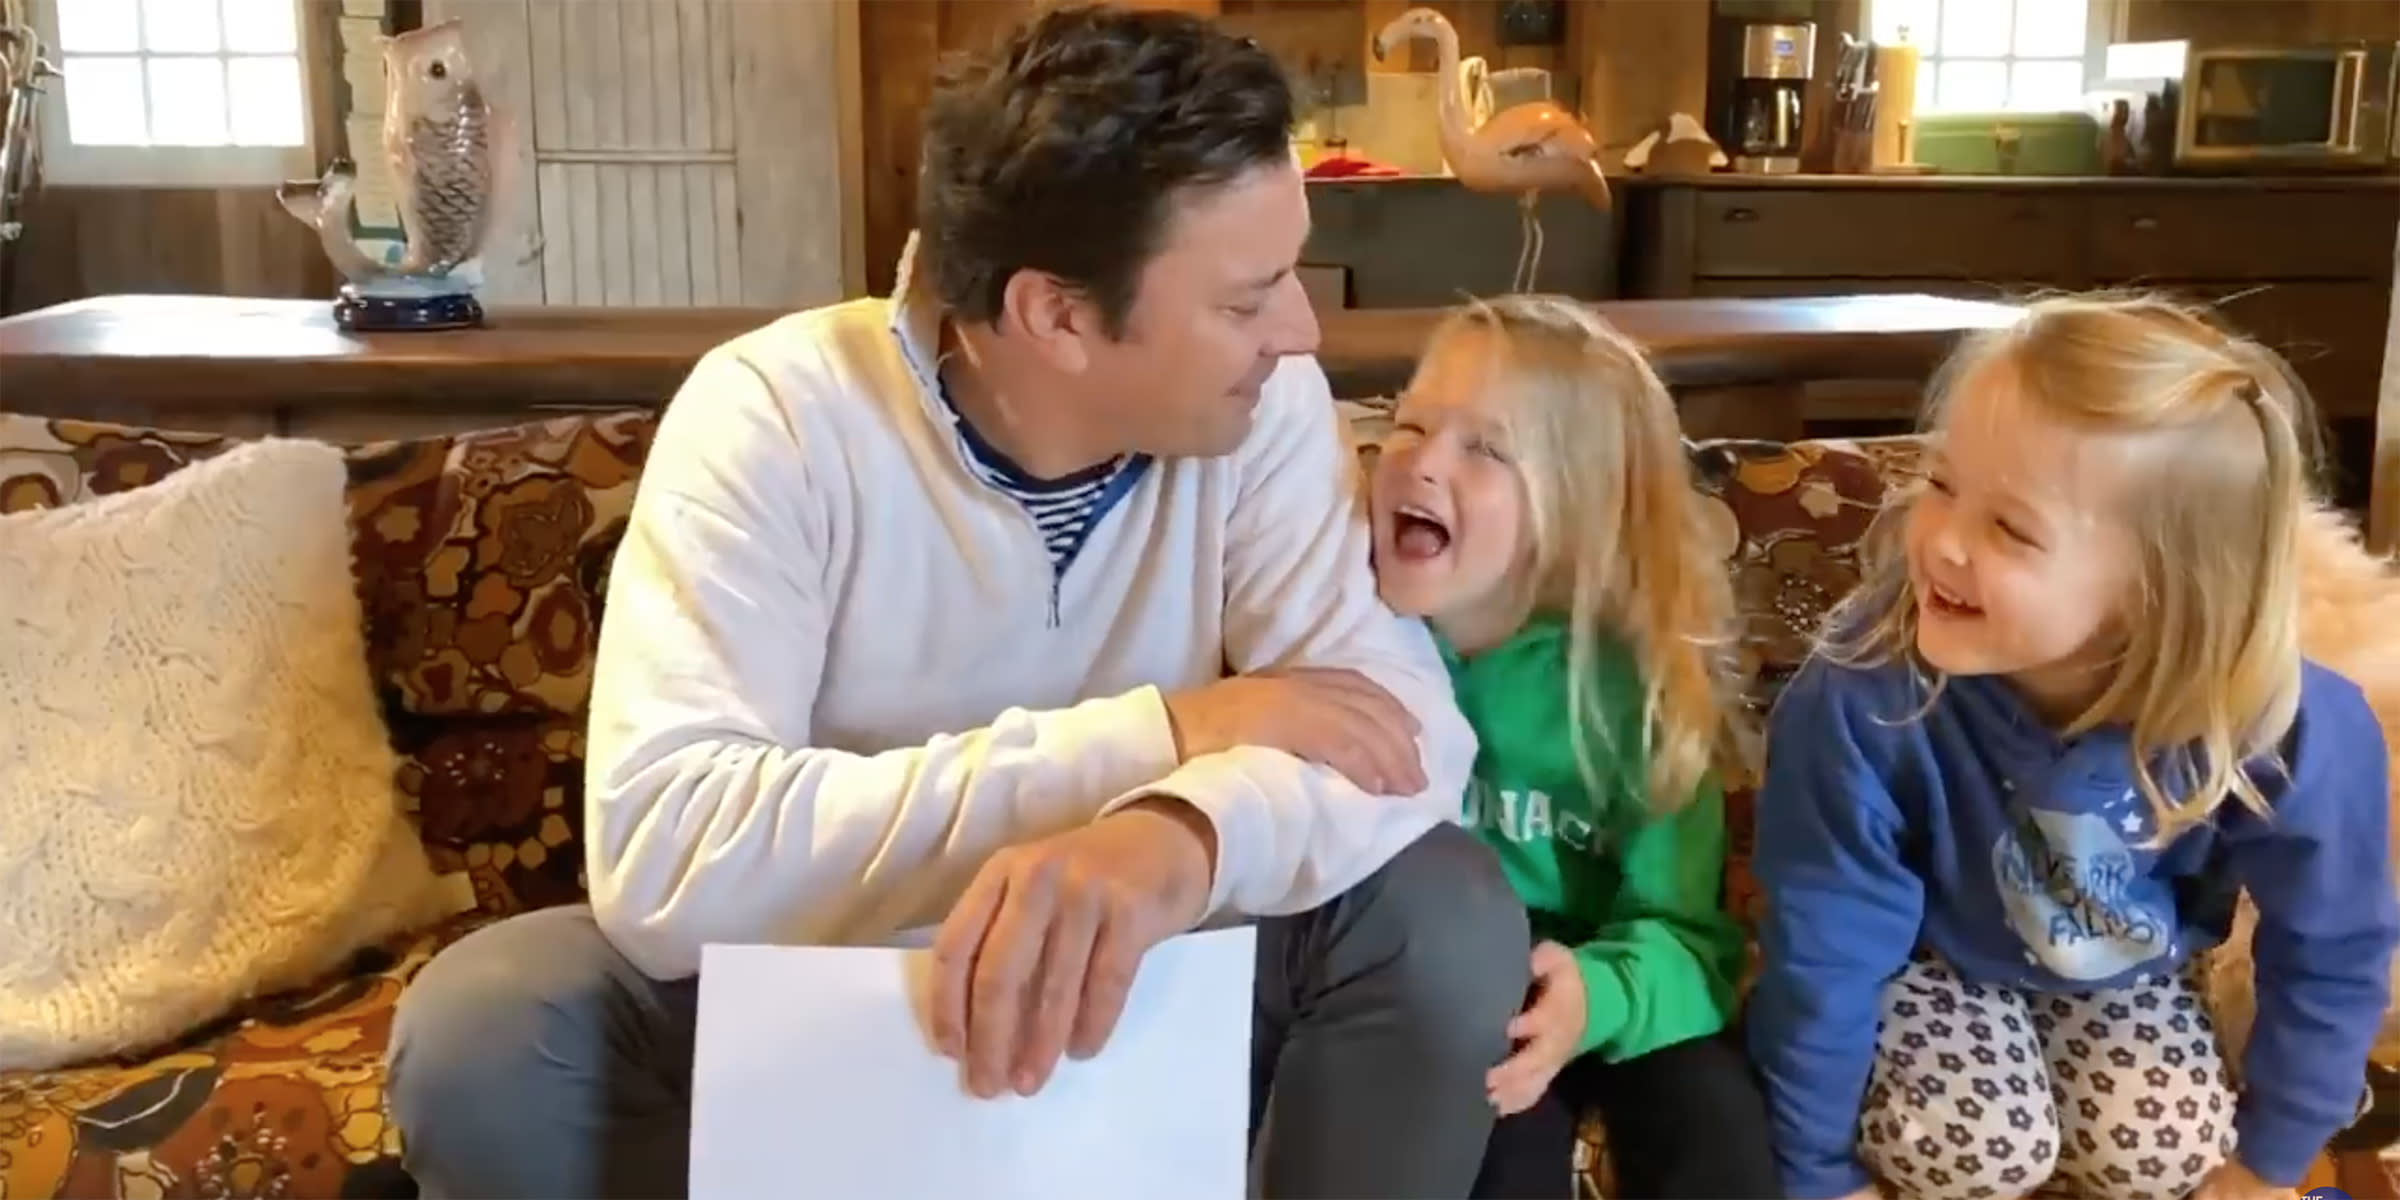 Jimmy Fallon And His Wife Explain Why Theyre Featuring Daughters On Tonight Show 8232